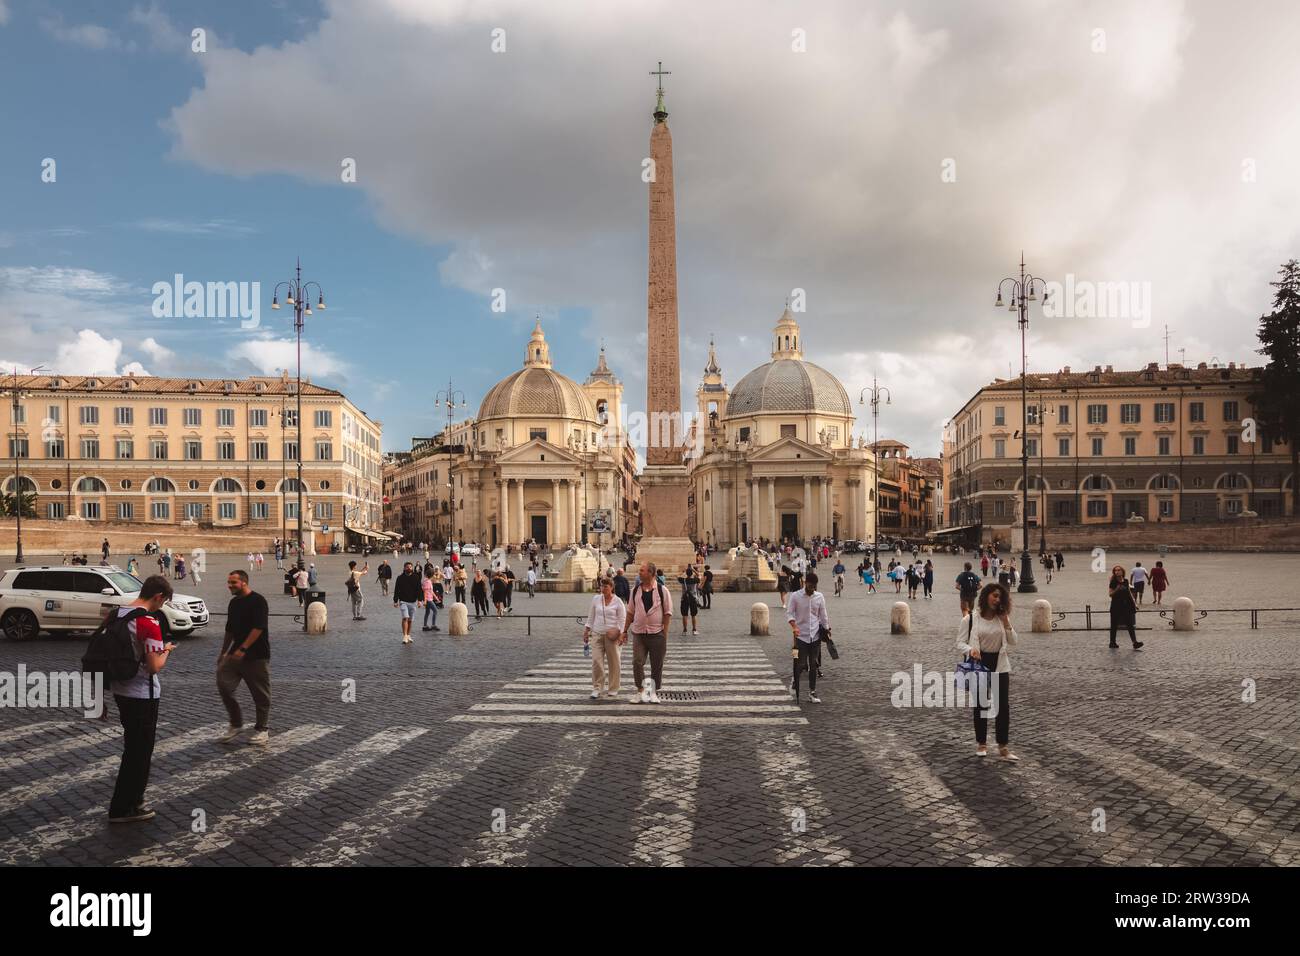 Rome, Italy - August 28, 2023: Tourists cross a pedestian crosswalk beside Baroque churches and an obelisk in the popular landmark Piazza del Popolo i Stock Photo